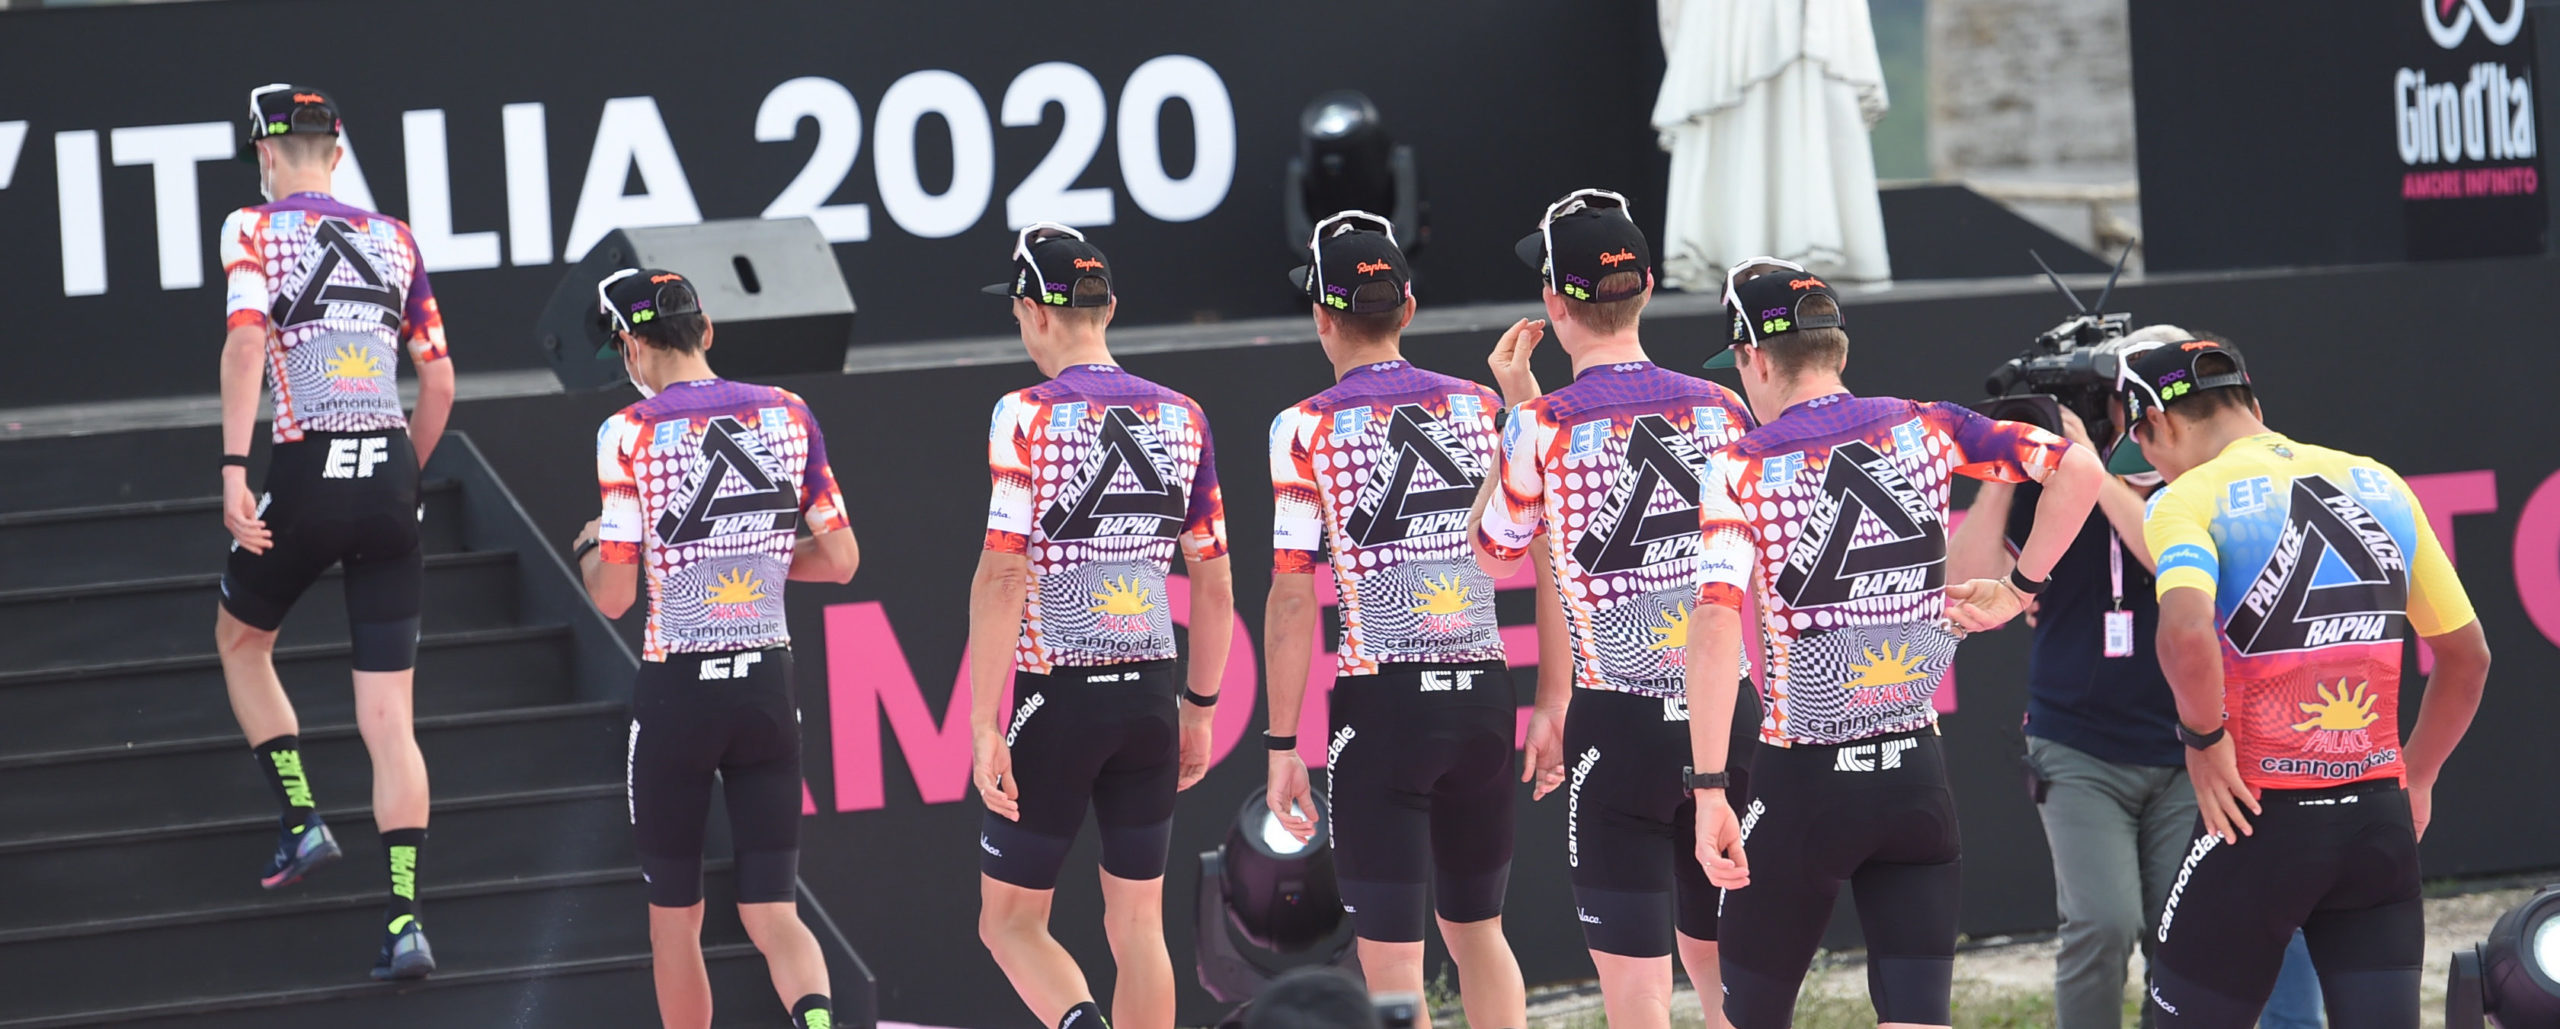 Ef Fined 4 500 For Palace Kit After Giro Time Trial Canadian Cycling Magazine